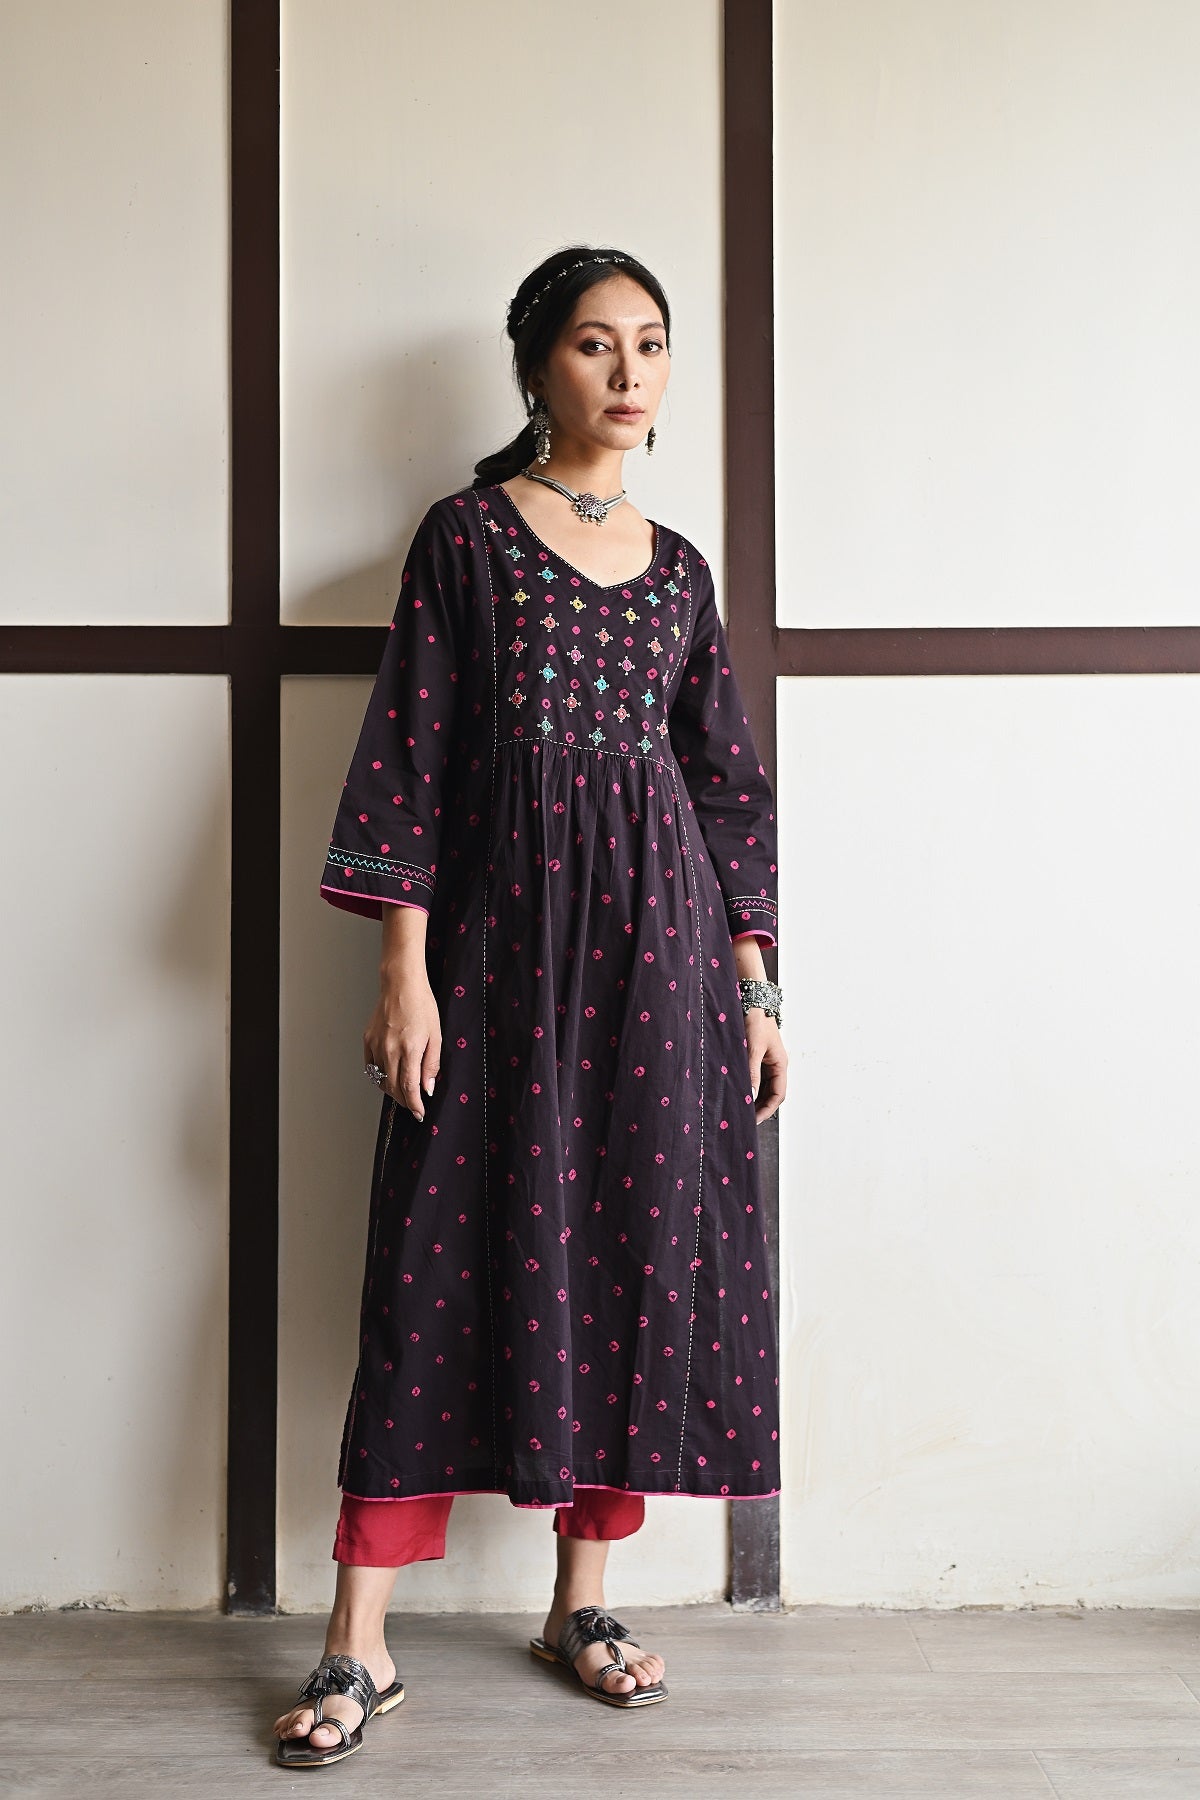 Kaanch Round Neck Bandhej And Embroidered Black Kurta